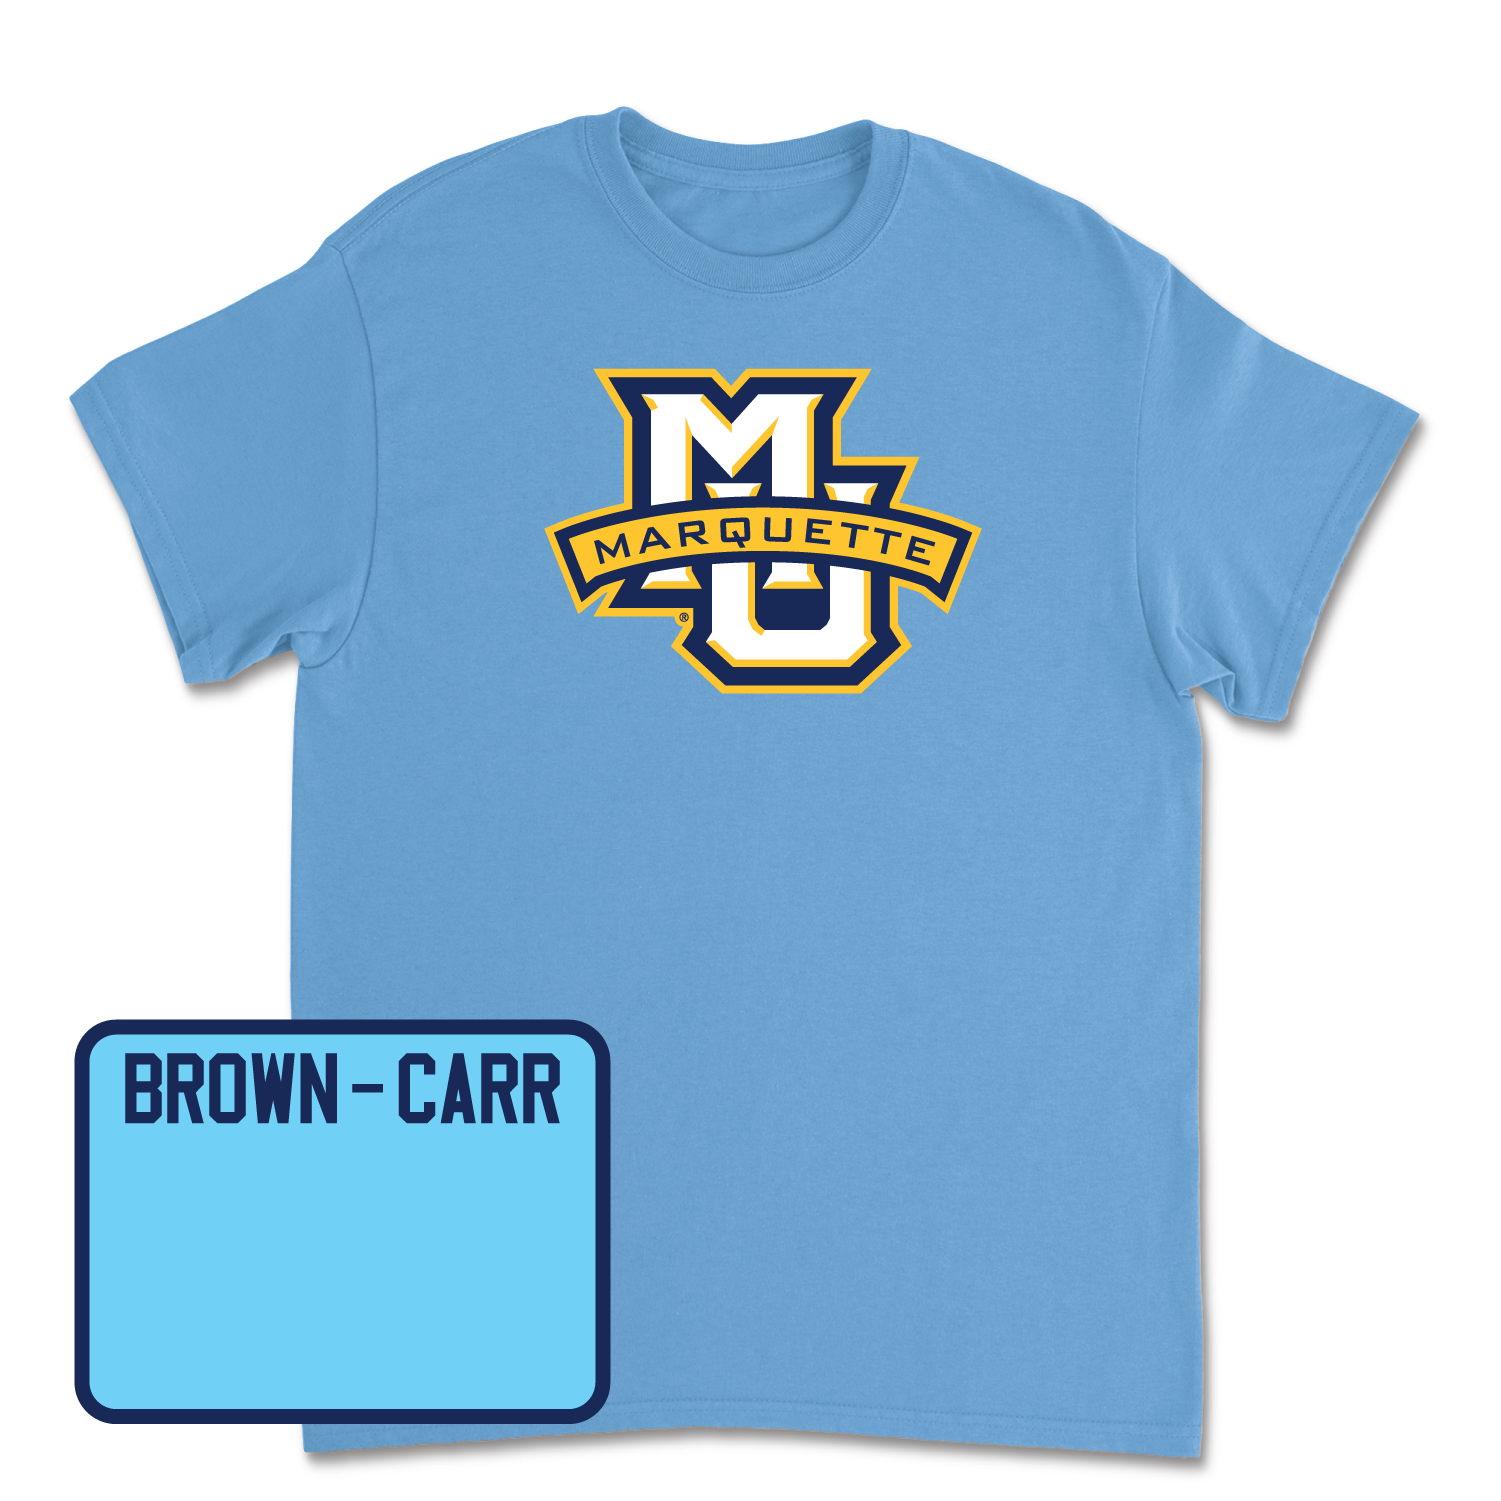 Championship Blue Track & Field Marquette Tee 2 X-Large / Siani Brown-Carr